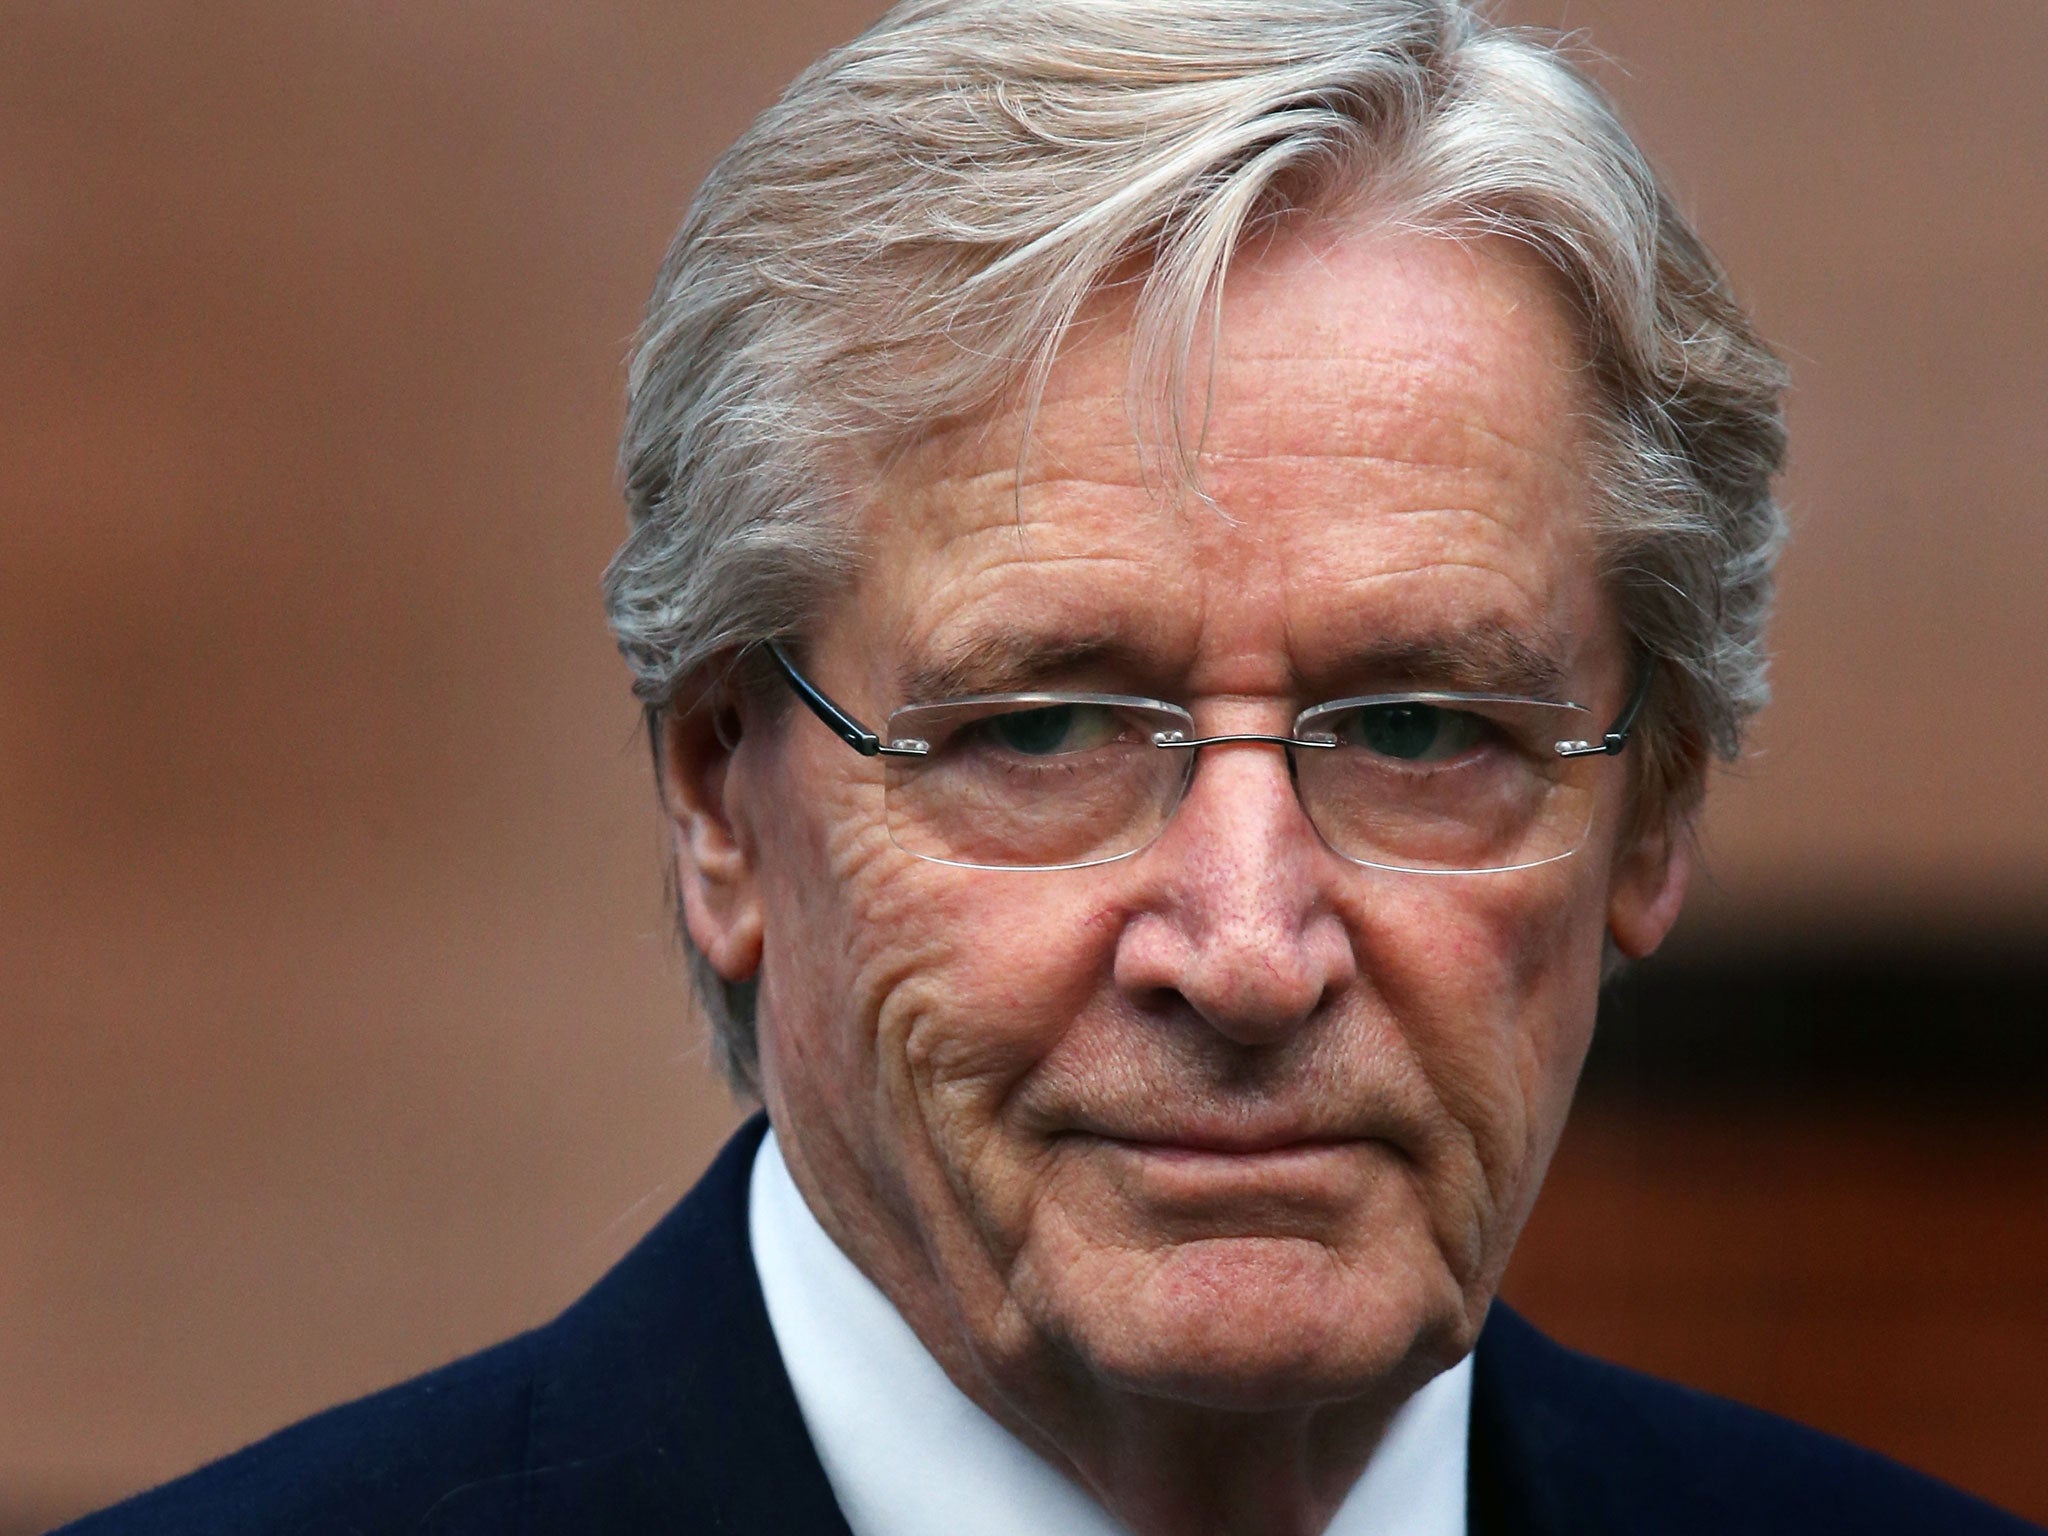 Coronation Street actor William Roache arrives at Preston Crown Court for the fourth day of his trial of historical sexual offence allegations on Friday.